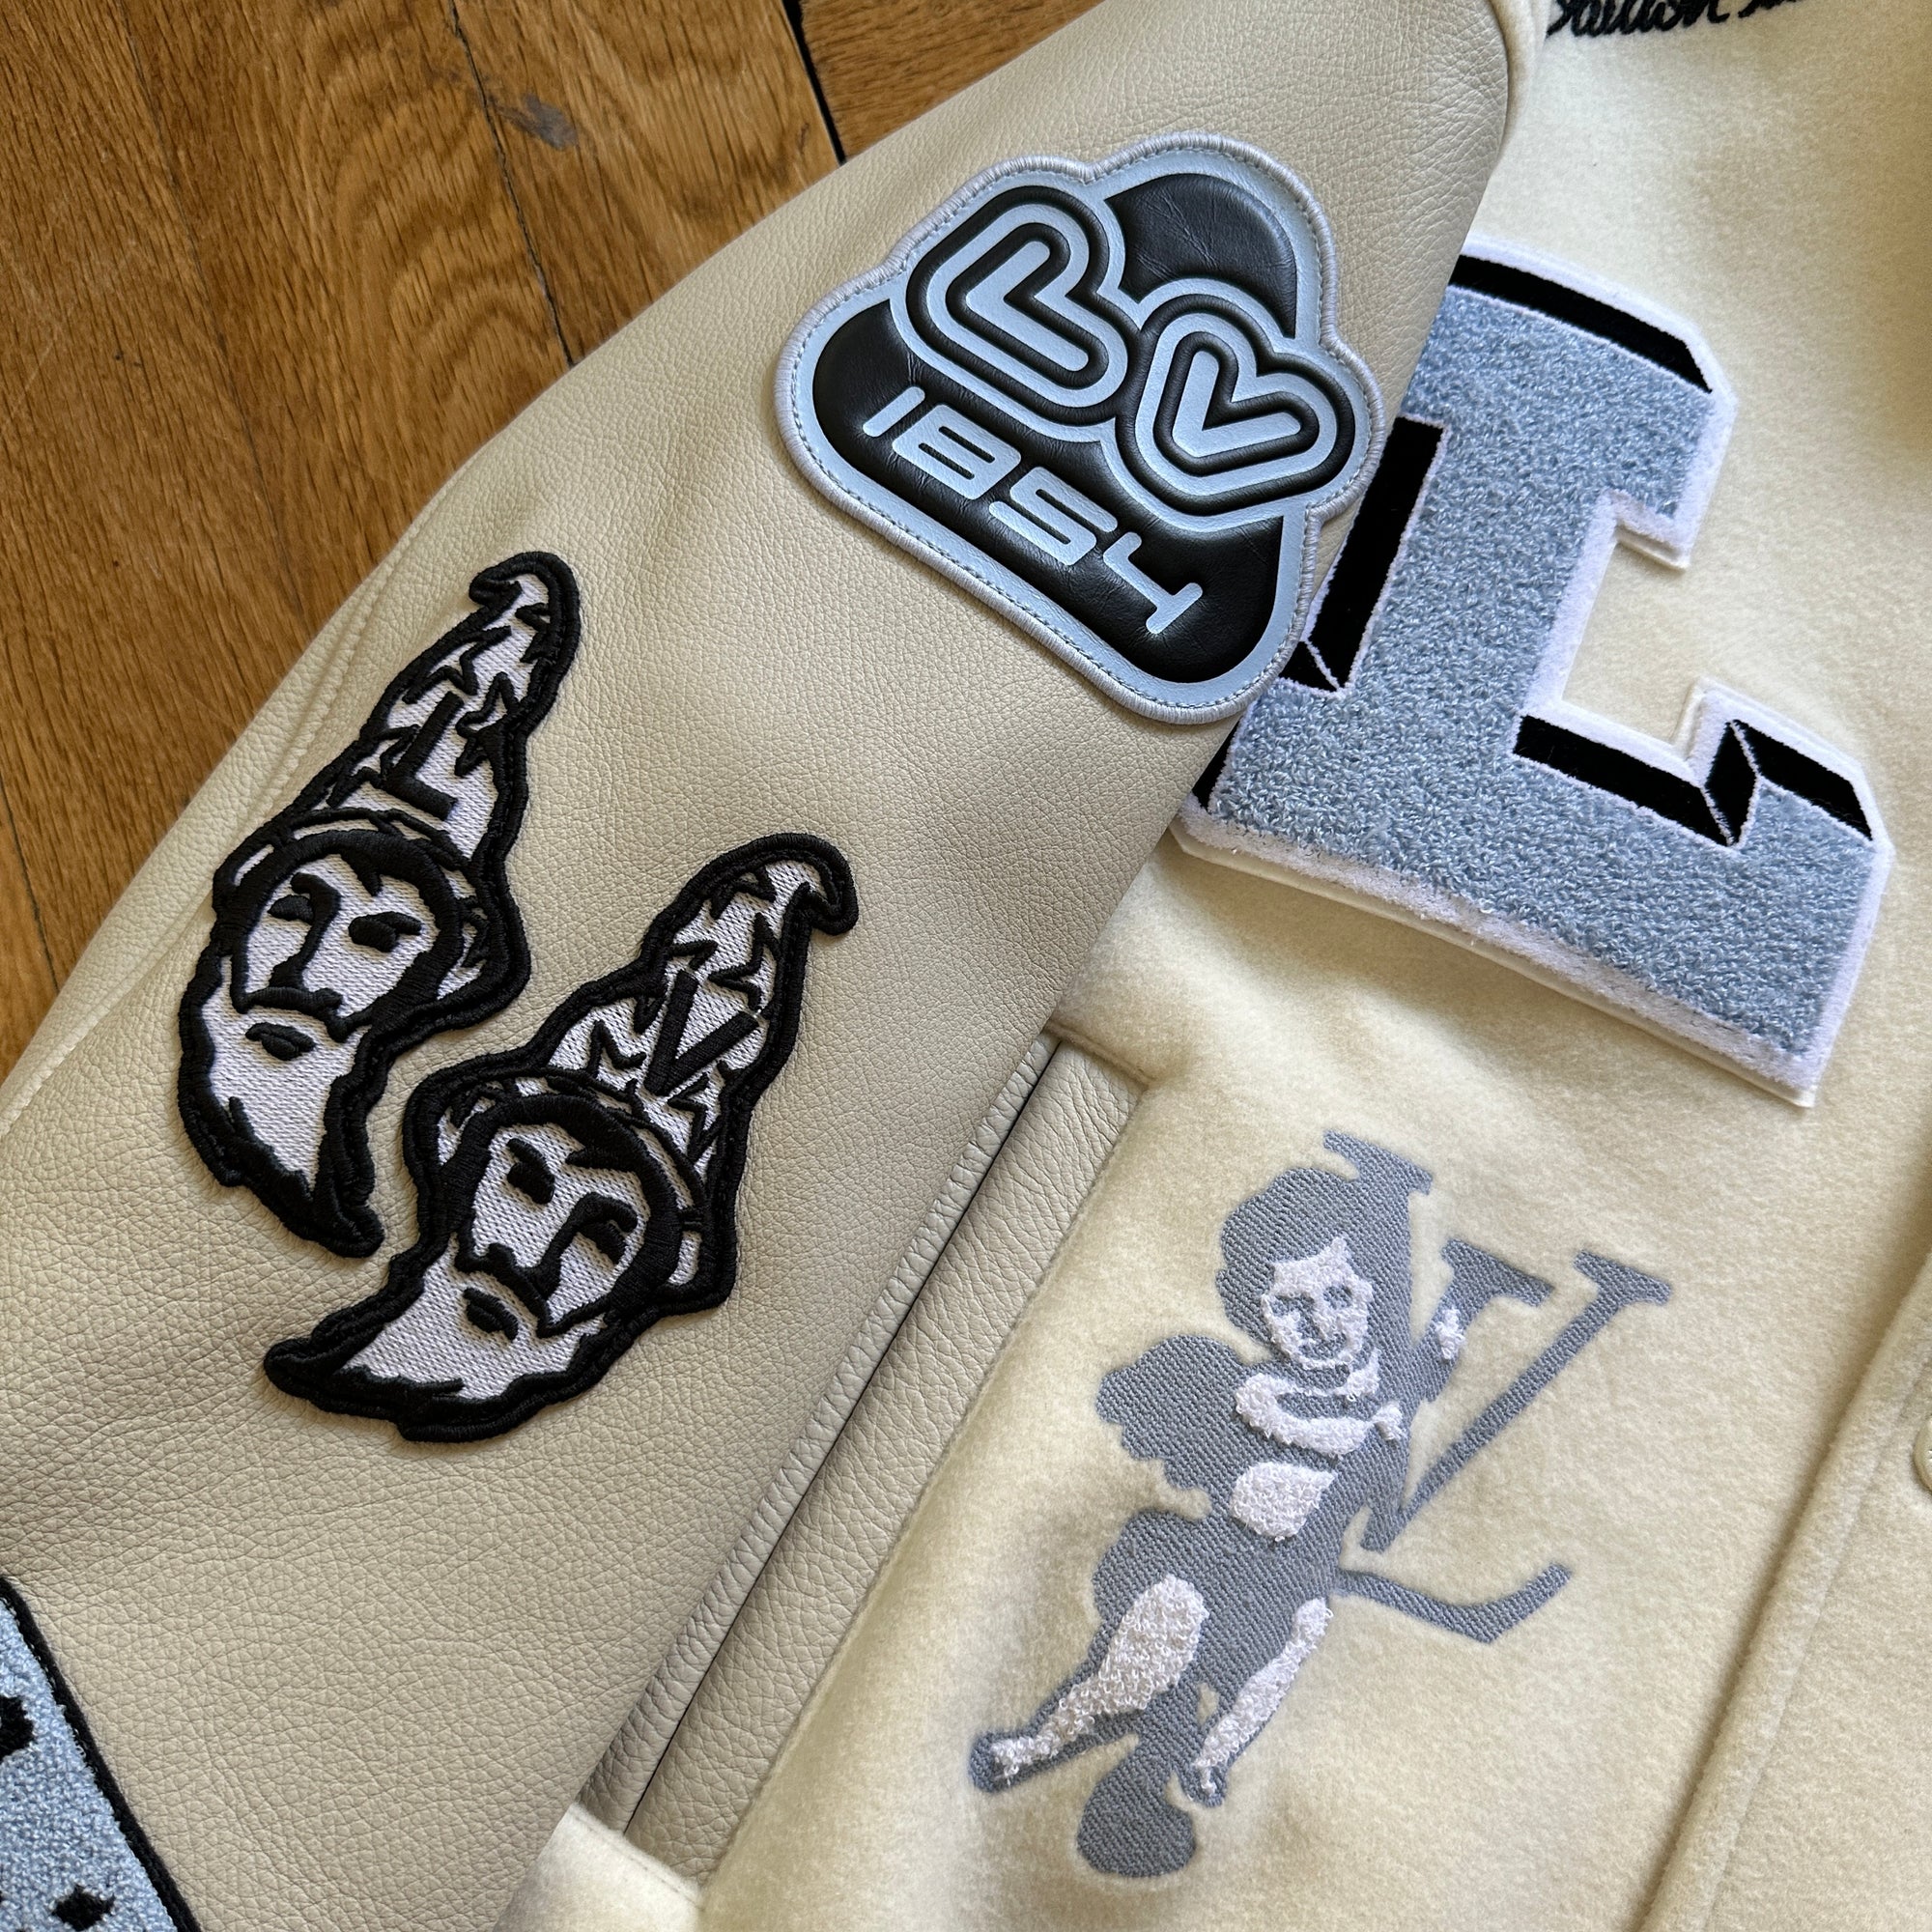 Louis Vuitton FW22 Cream Patched Bunny Varsity Jacket